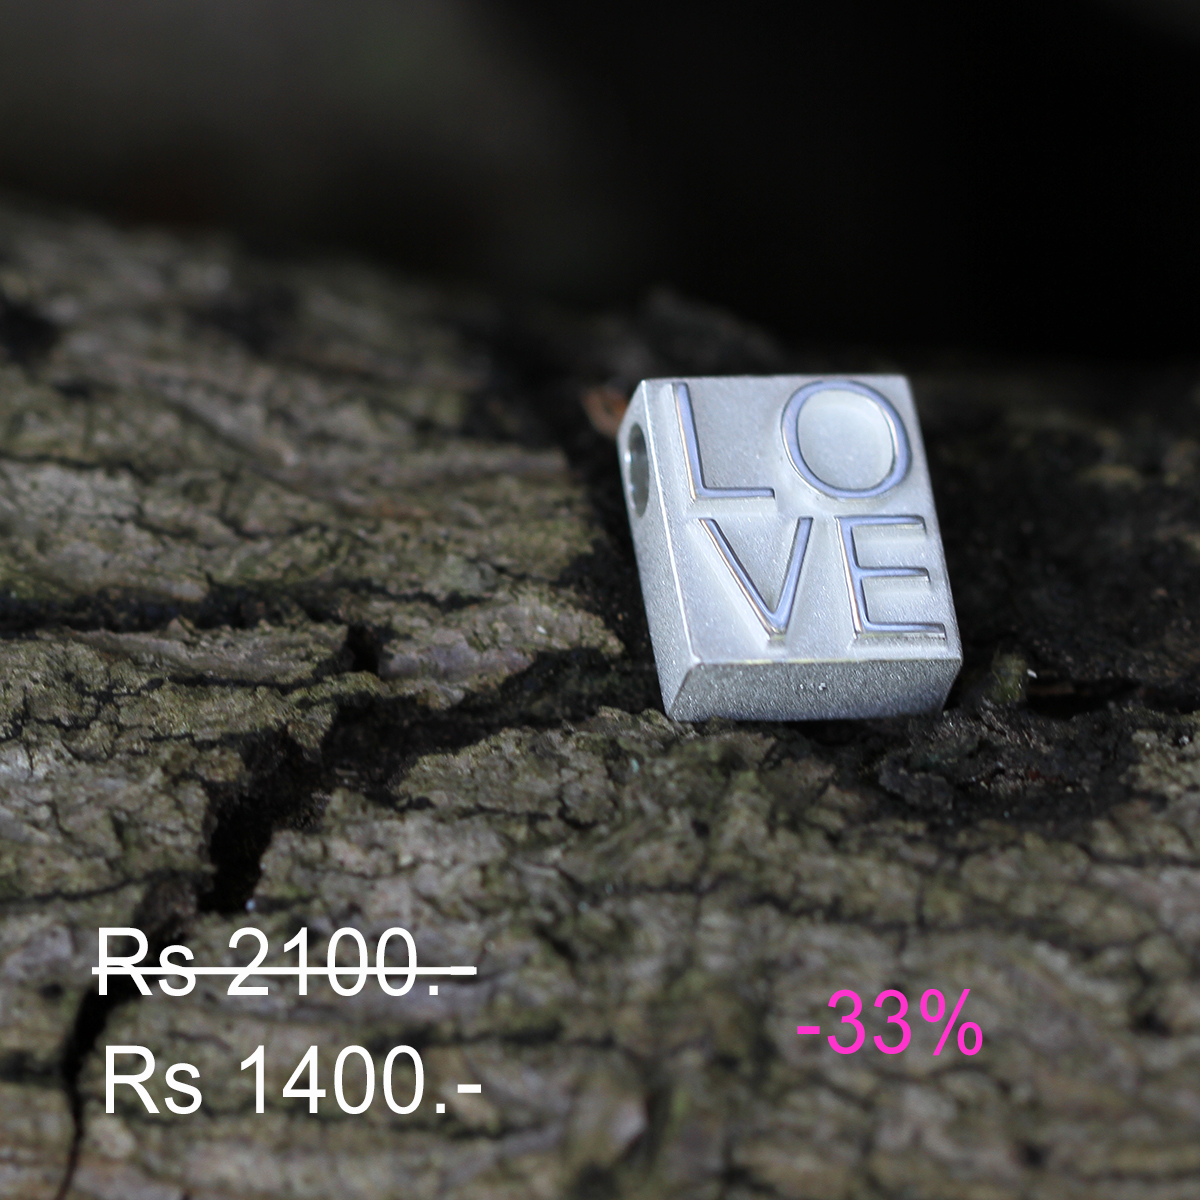 Discounted pendant